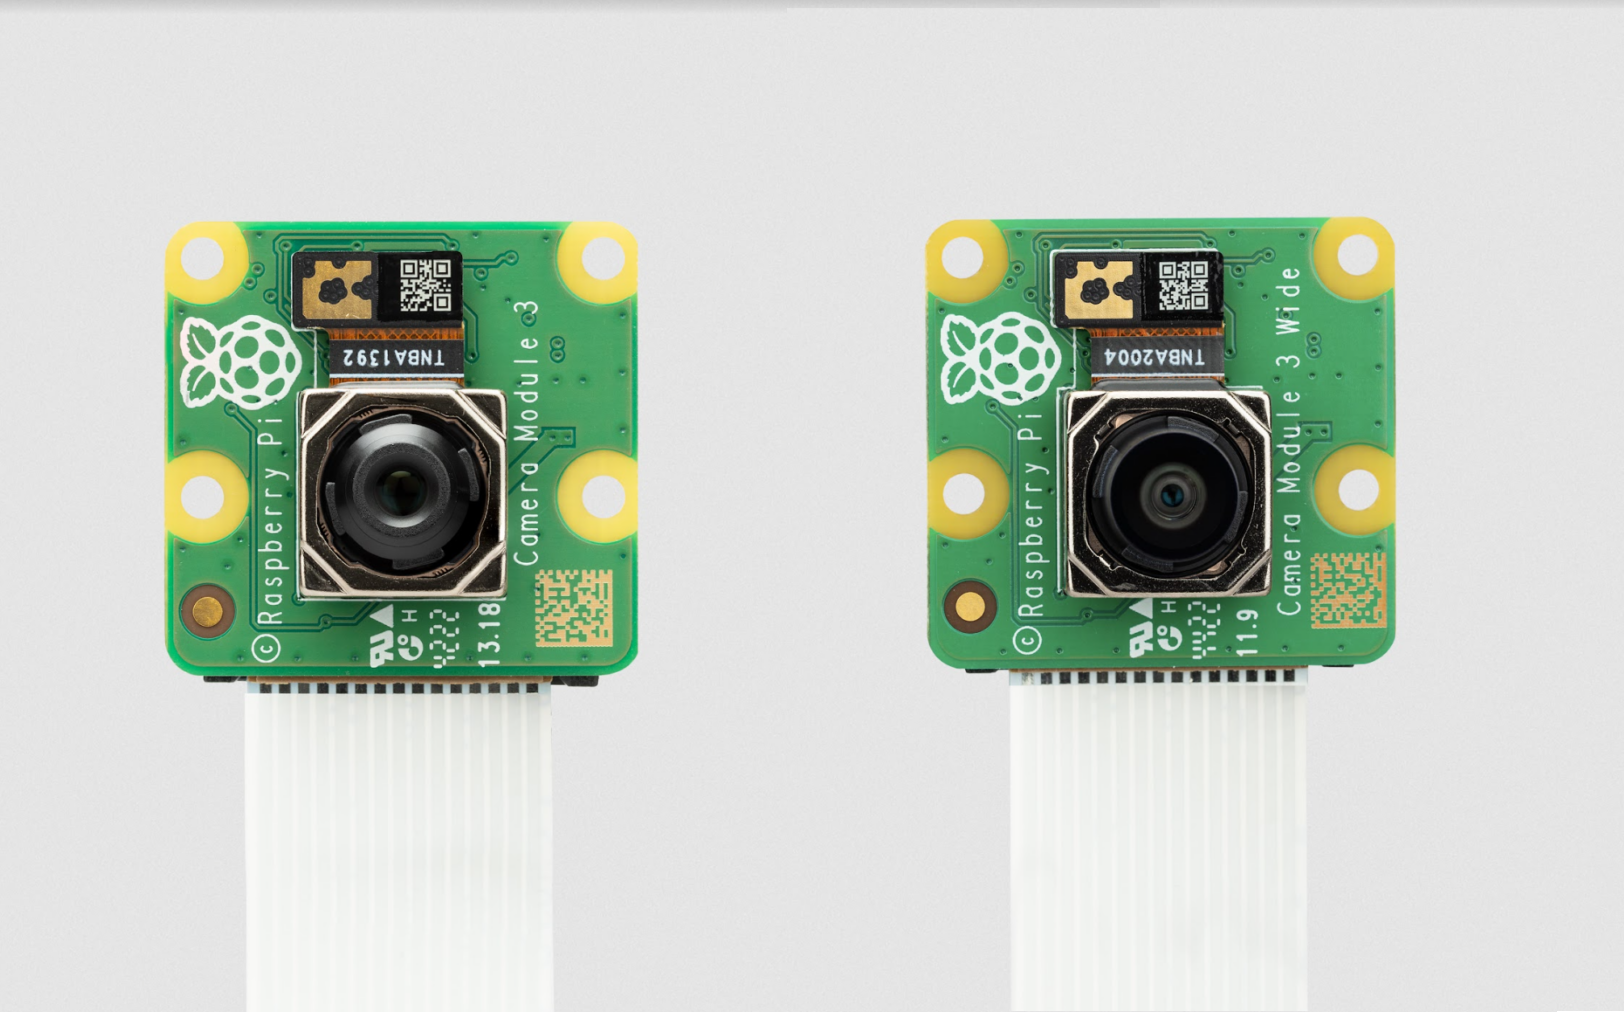 Just Launched - Raspberry Pi Camera Module 12MP sensor ultra-fast autofocus with HDR mode